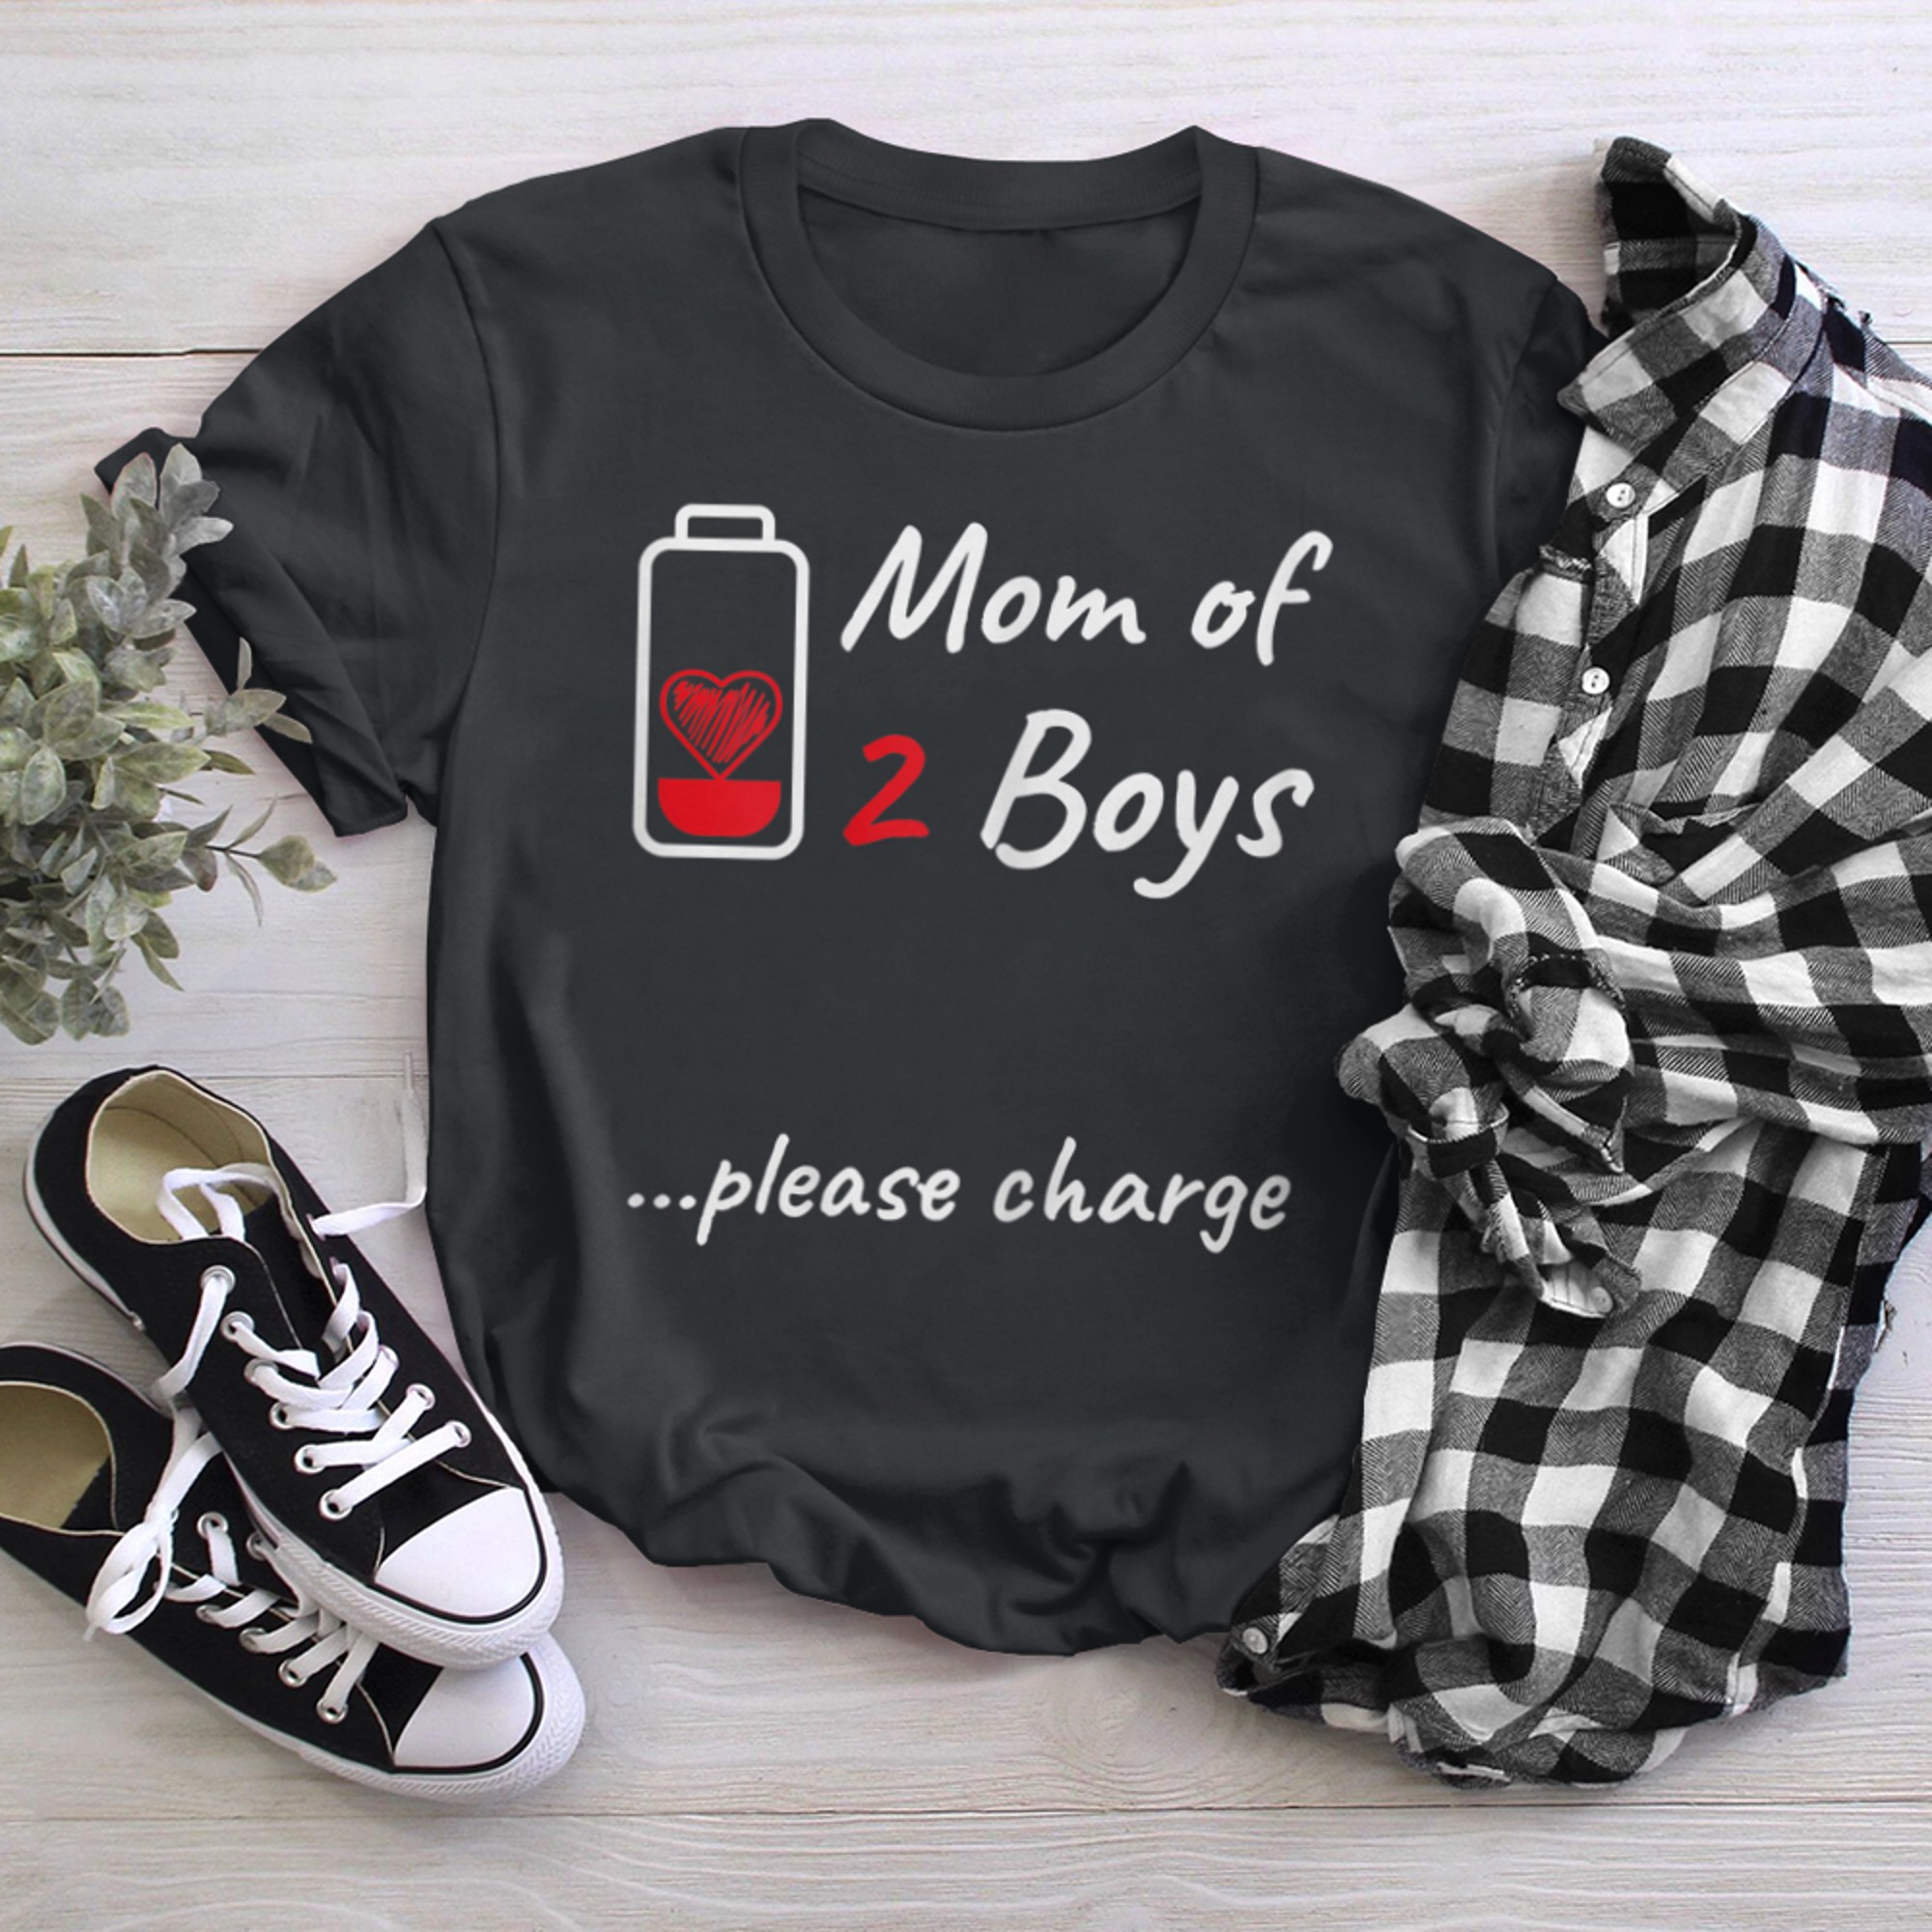 Mom of ... please charge  Perfect Mother's Day t-shirt black